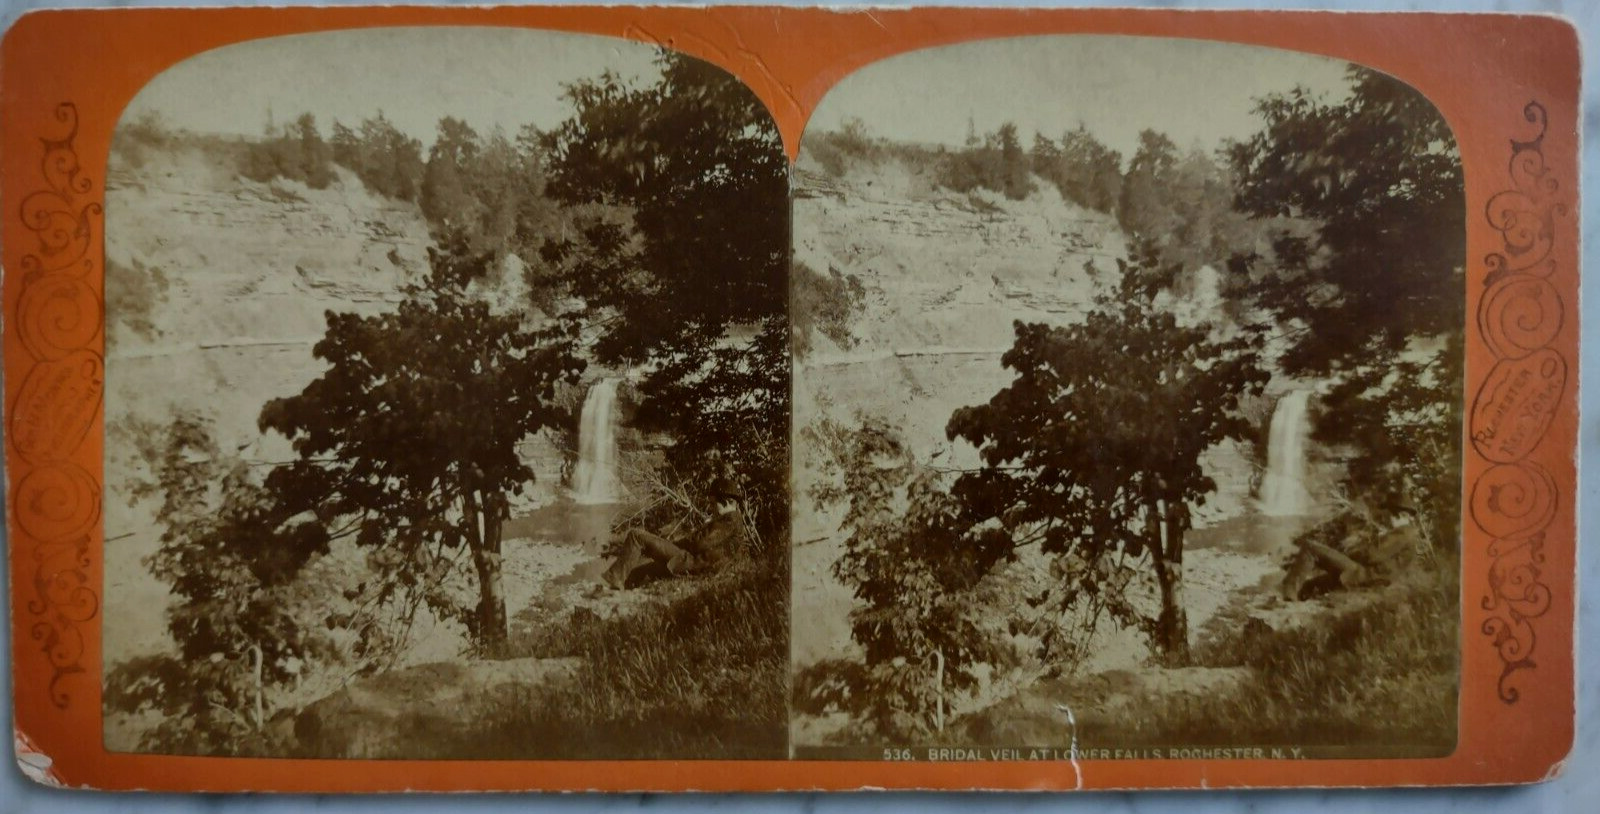 Bridal Veil at Lower Falls Rochester NY Vintage Photo Stereoview / George Monroe